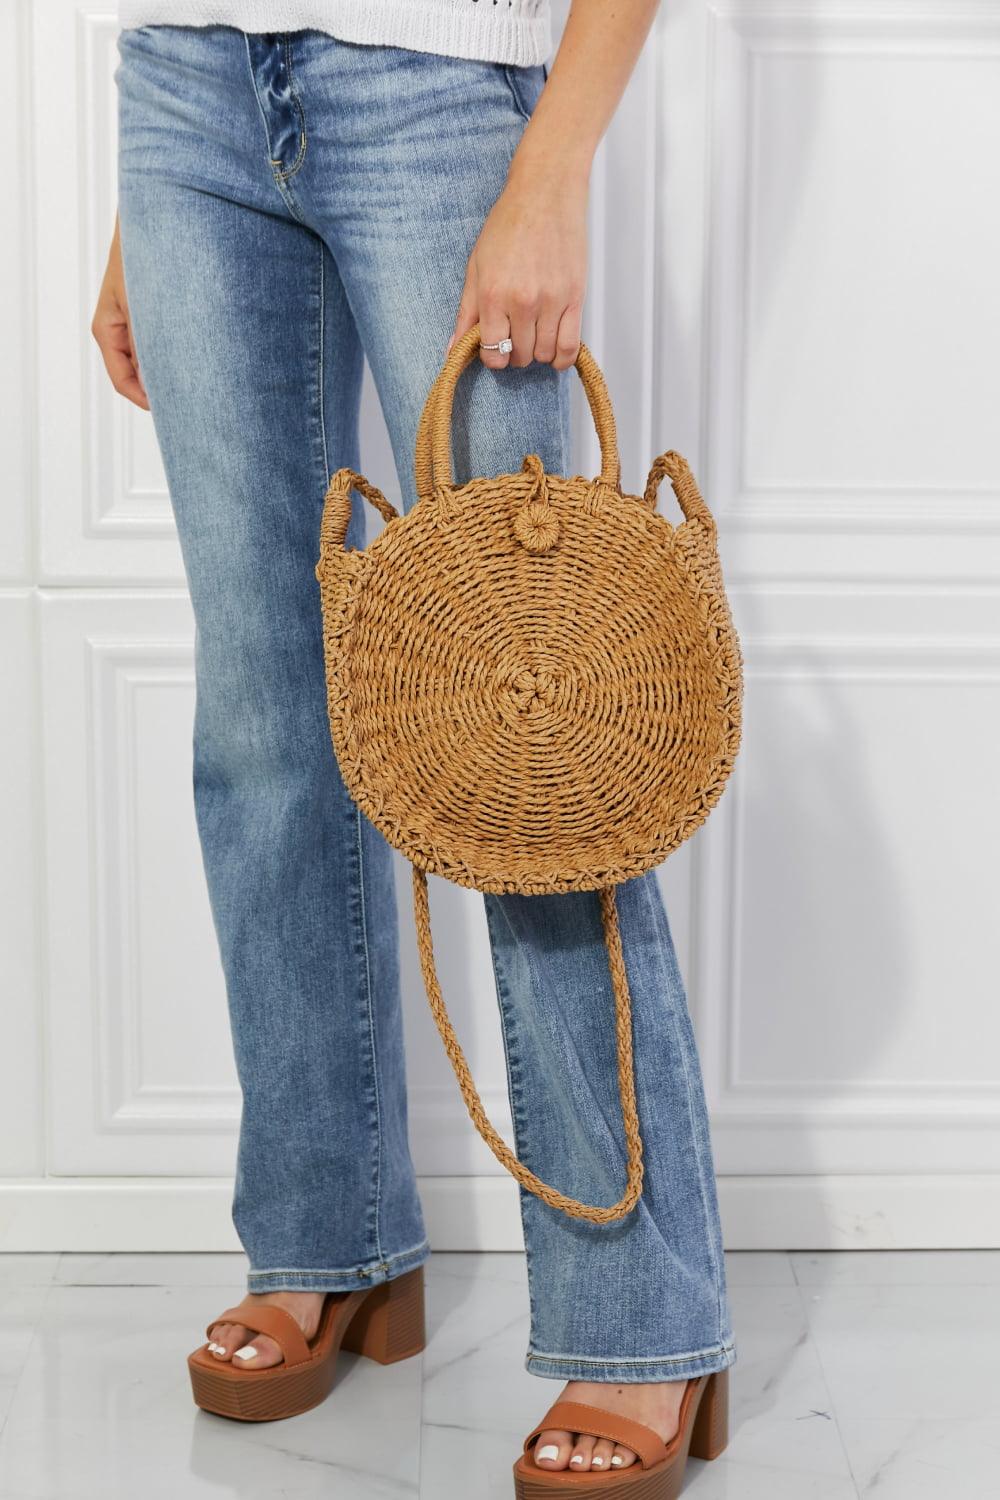 Justin Taylor Feeling Cute Rounded Rattan Handbag in Camel - Glamorous Boutique USA L.L.C.